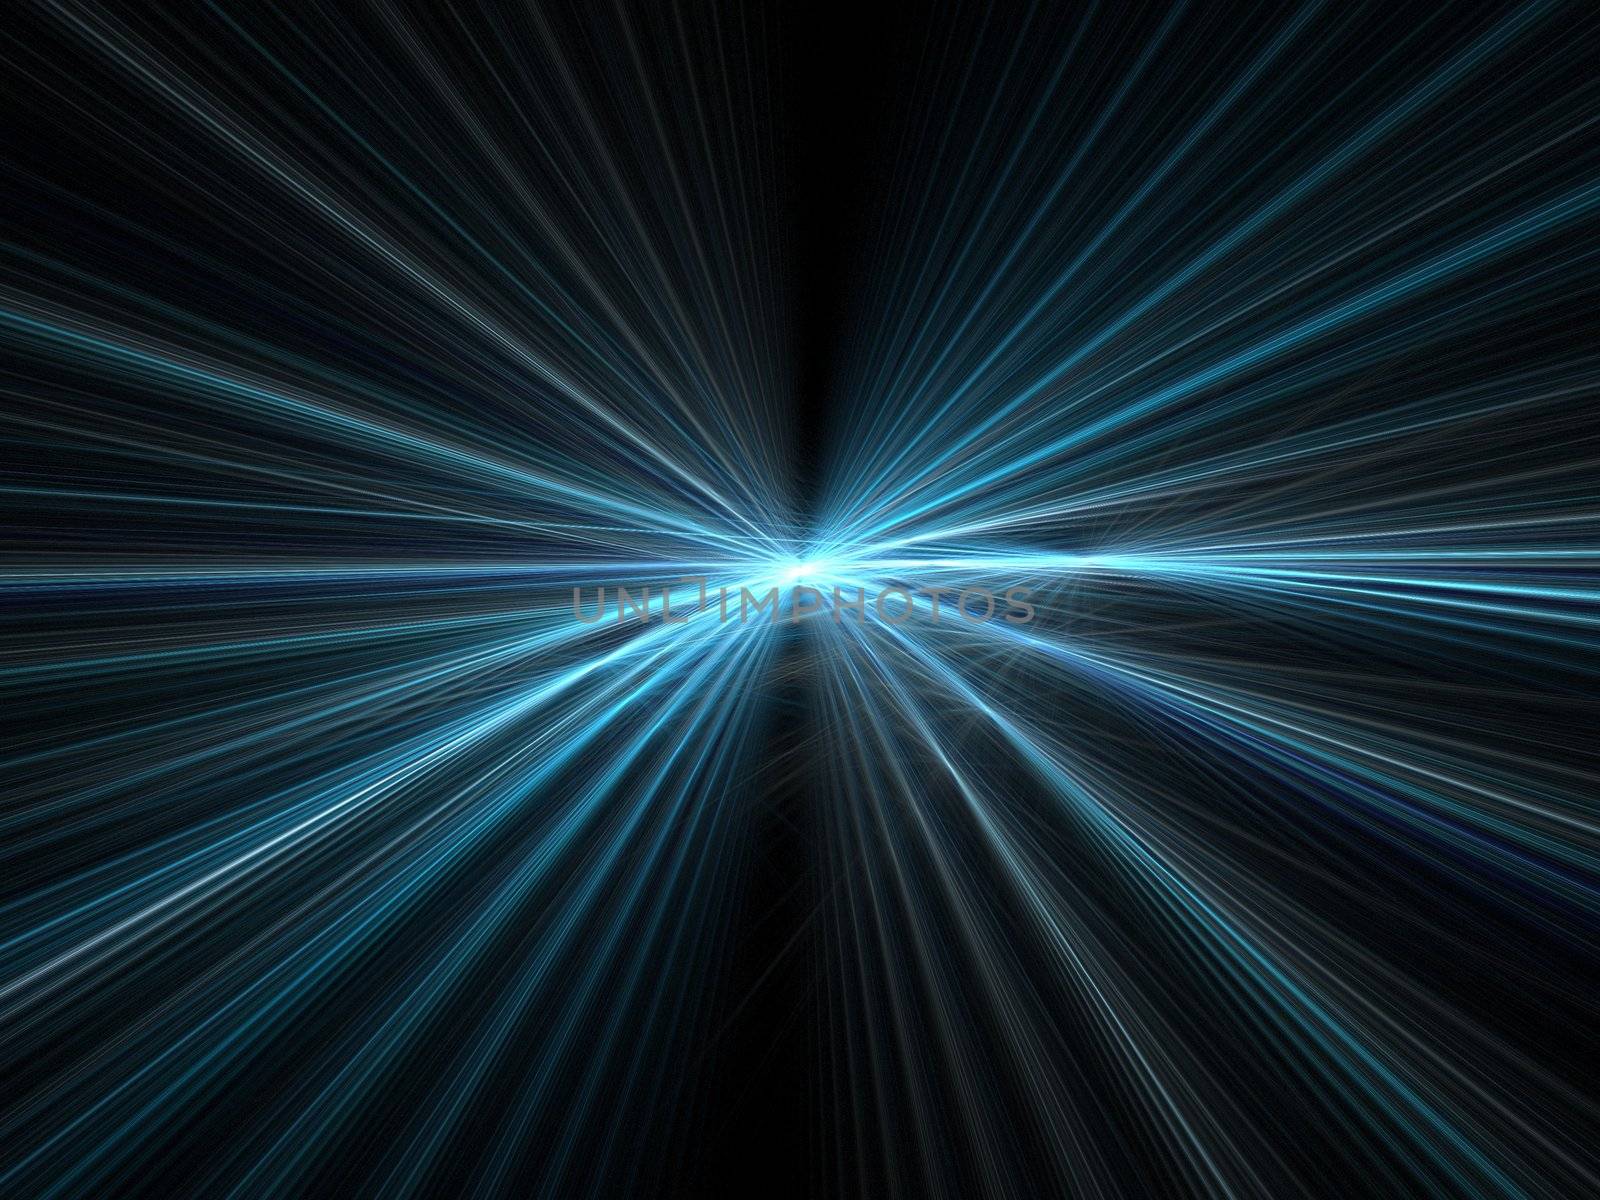 Abstract fractal background. Computer generated graphics. Incredible speed - blue motion light rays.